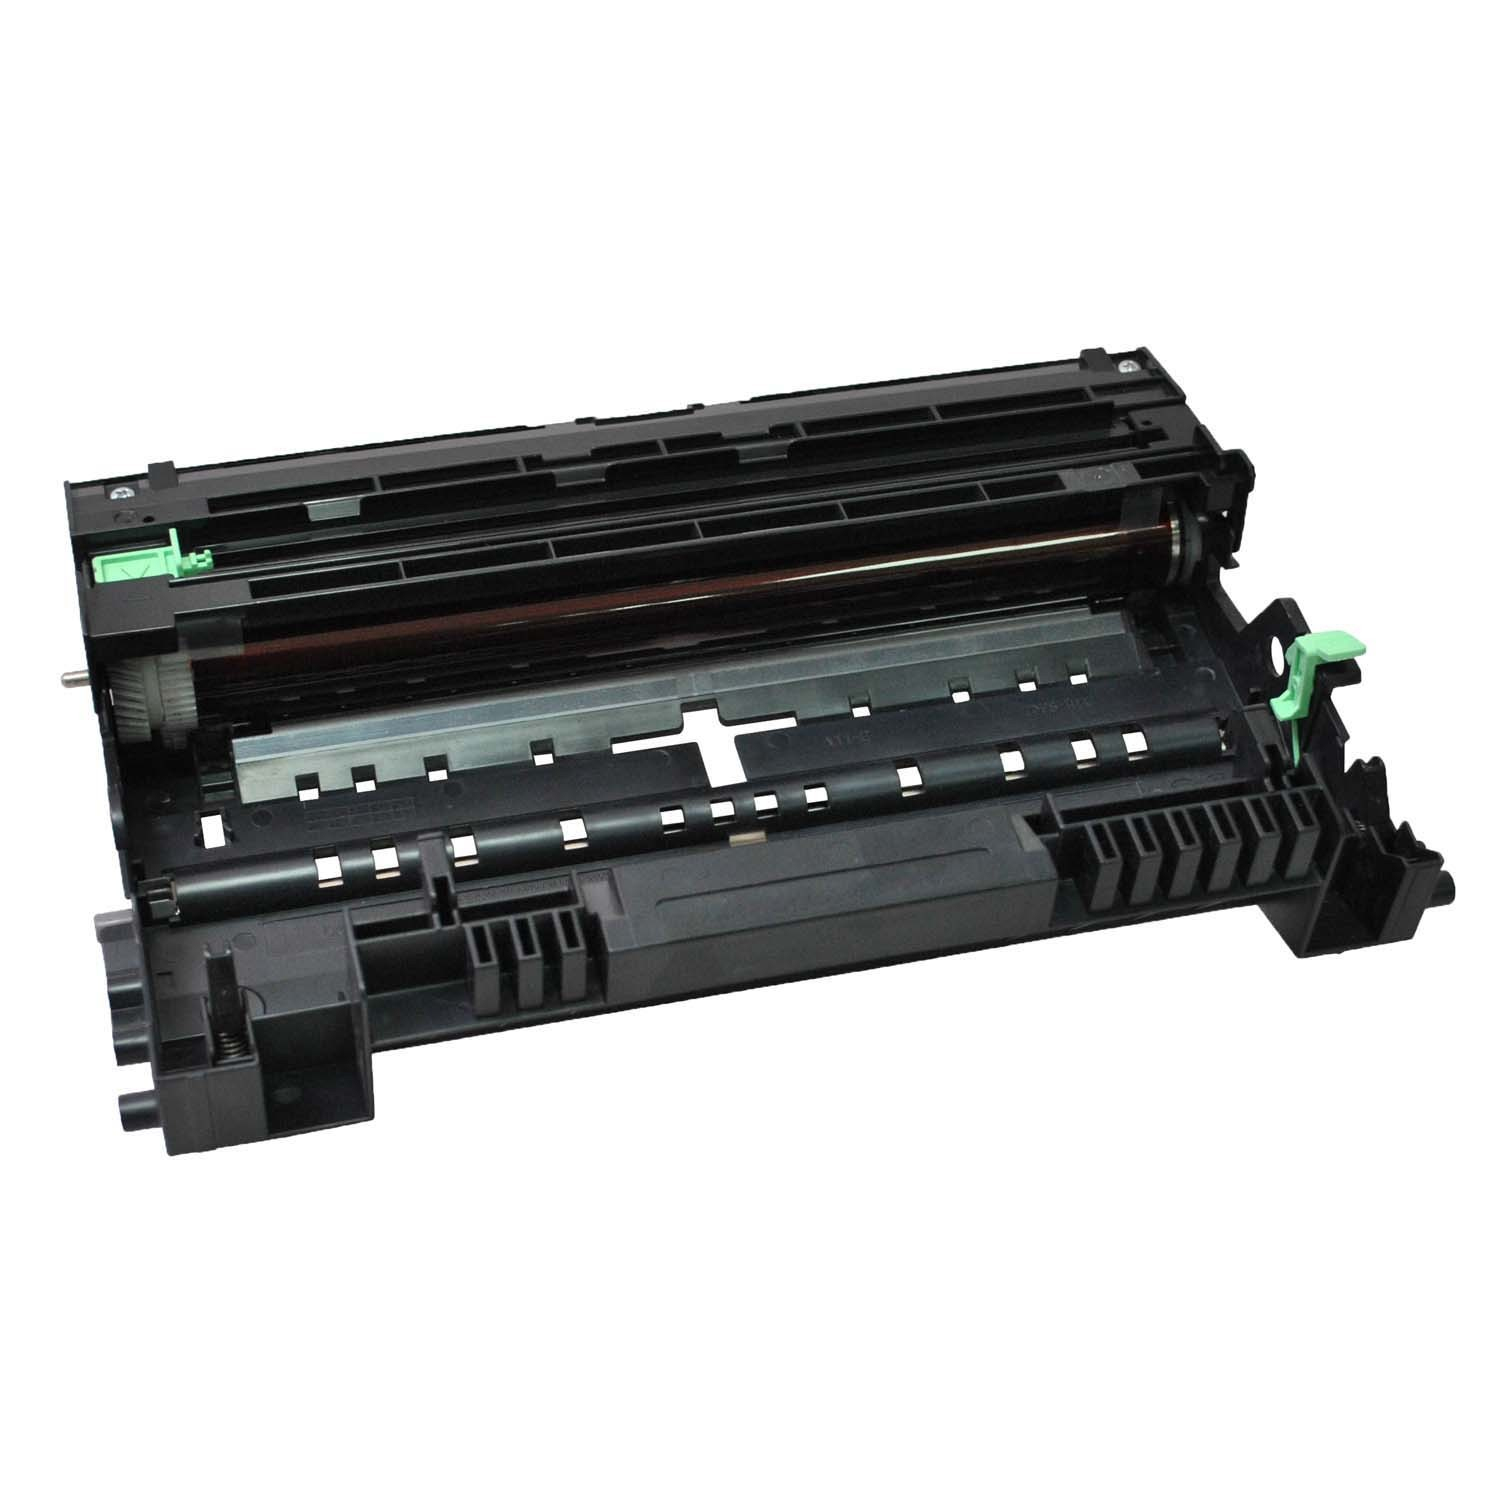 V7 Drum for select Brother printers - Replaces DR3300